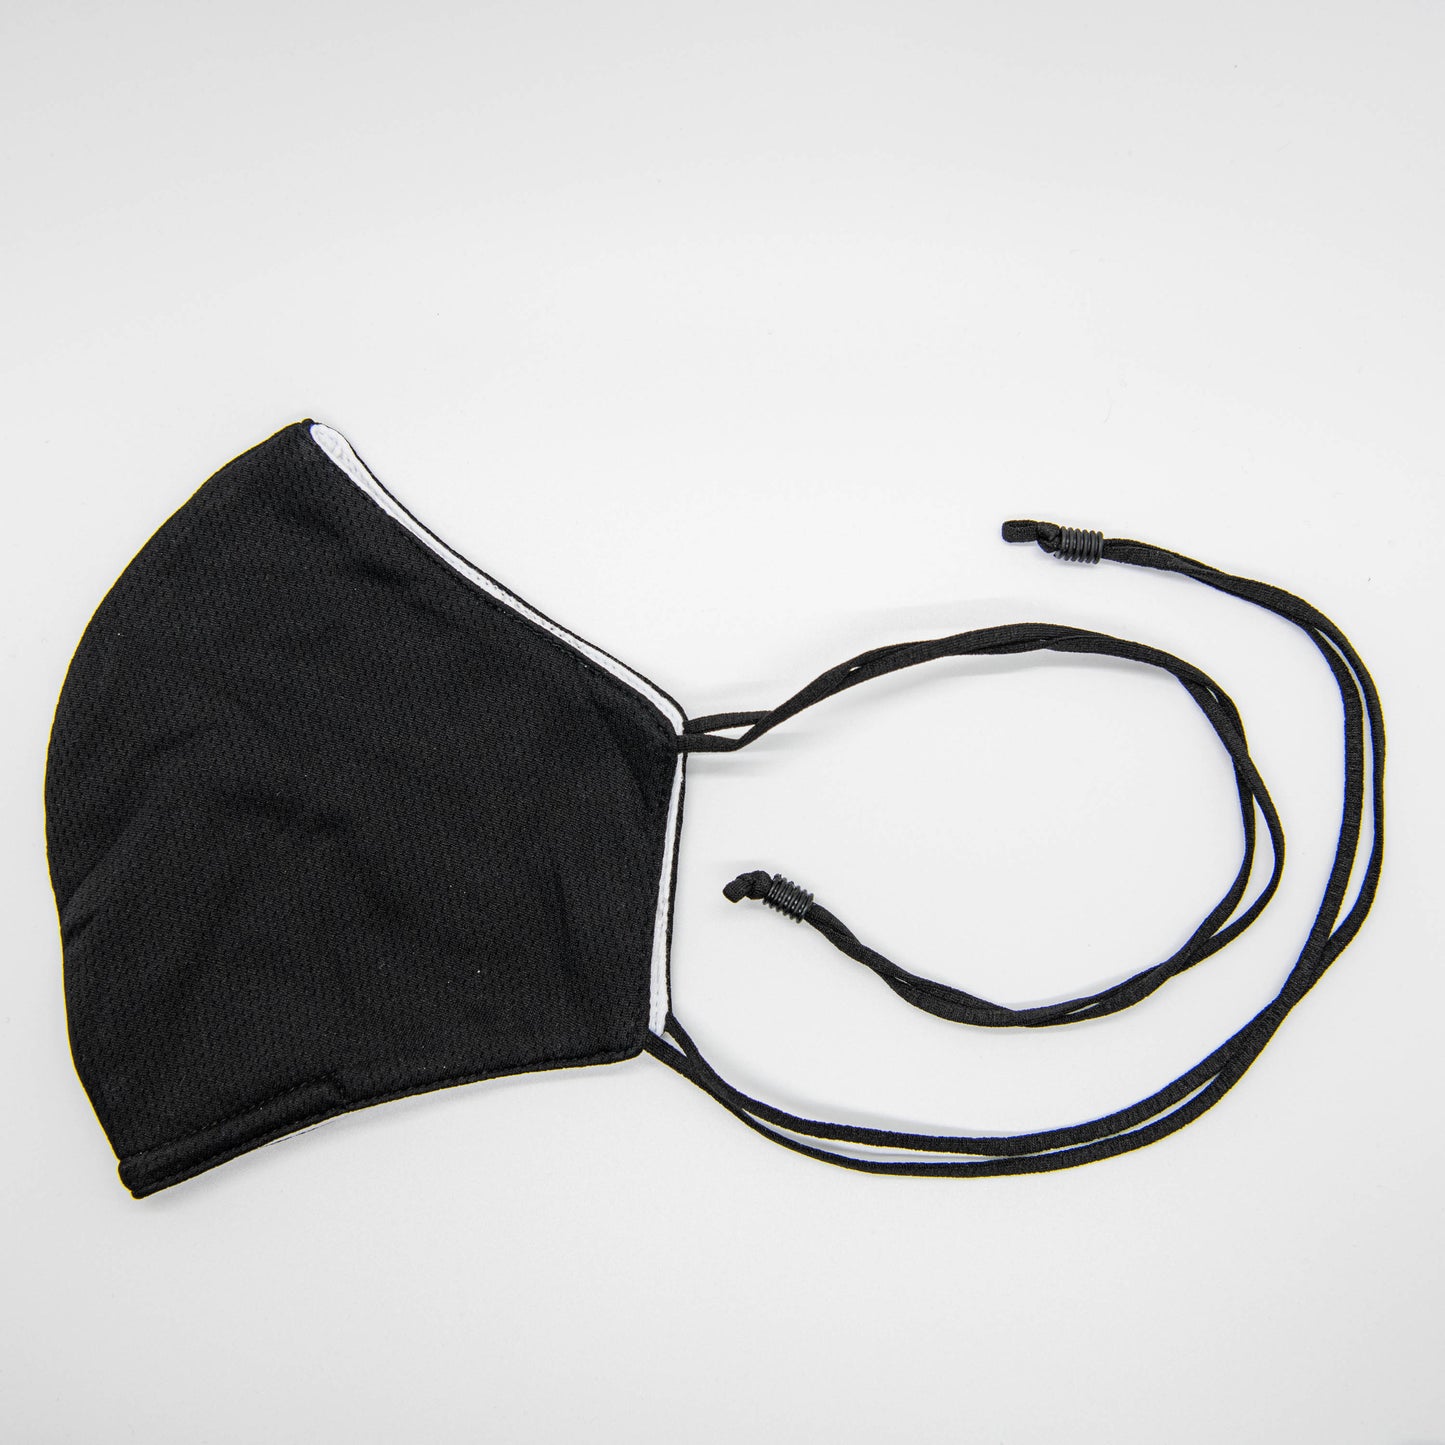 New!!! Adult Solid Black Wrap Around Daily Face Mask